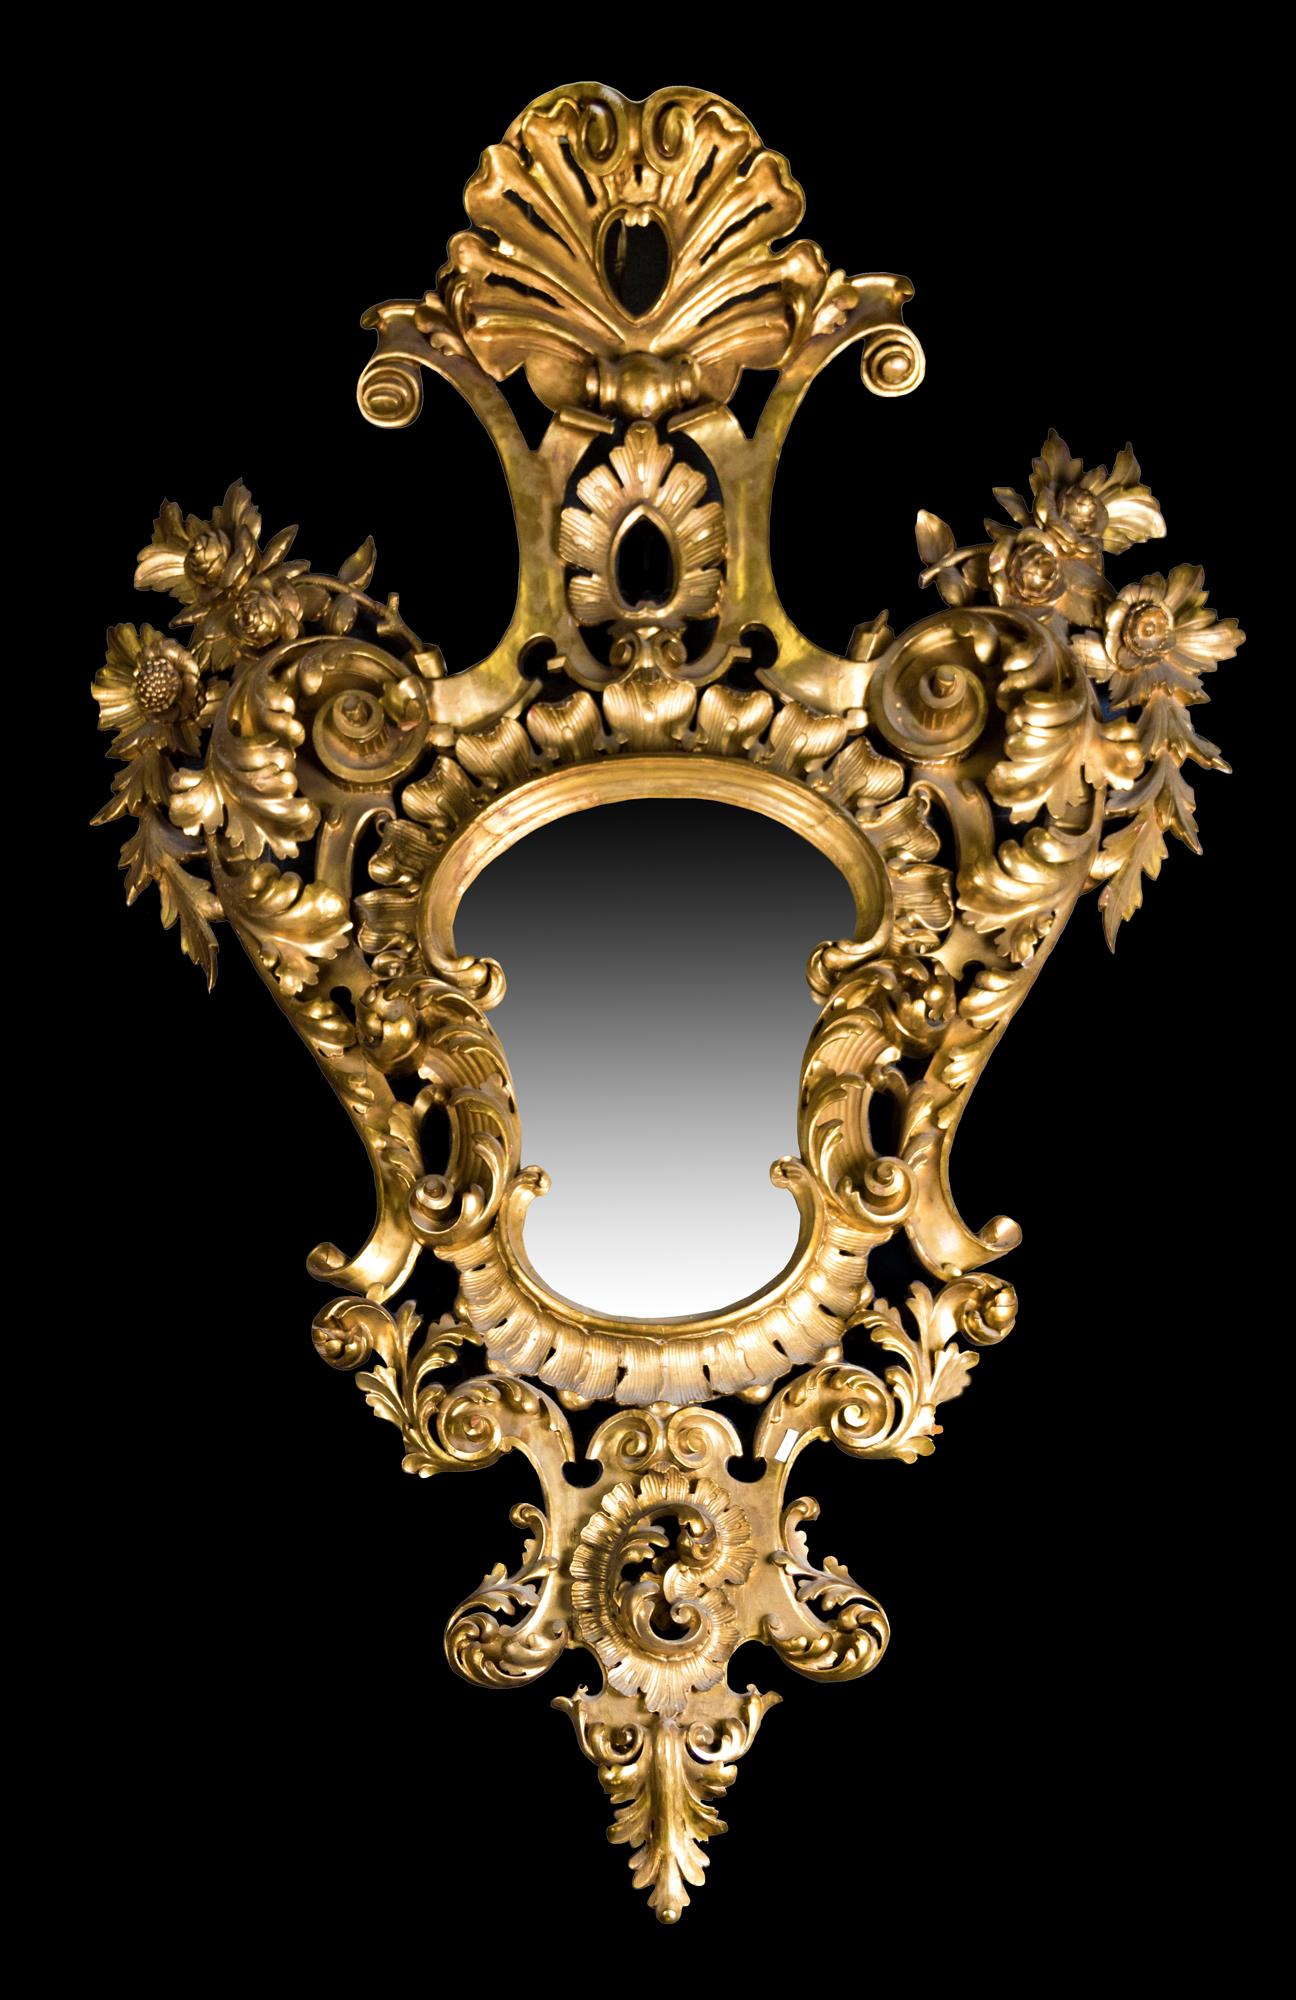 Ornamental mirror made in gilded wood decorated with an elaborate composition around a central space, reserved for the mirror. From the inside out, the decoration, with accentuated chiaroscuro, shows curved shapes that recall those from the 18th